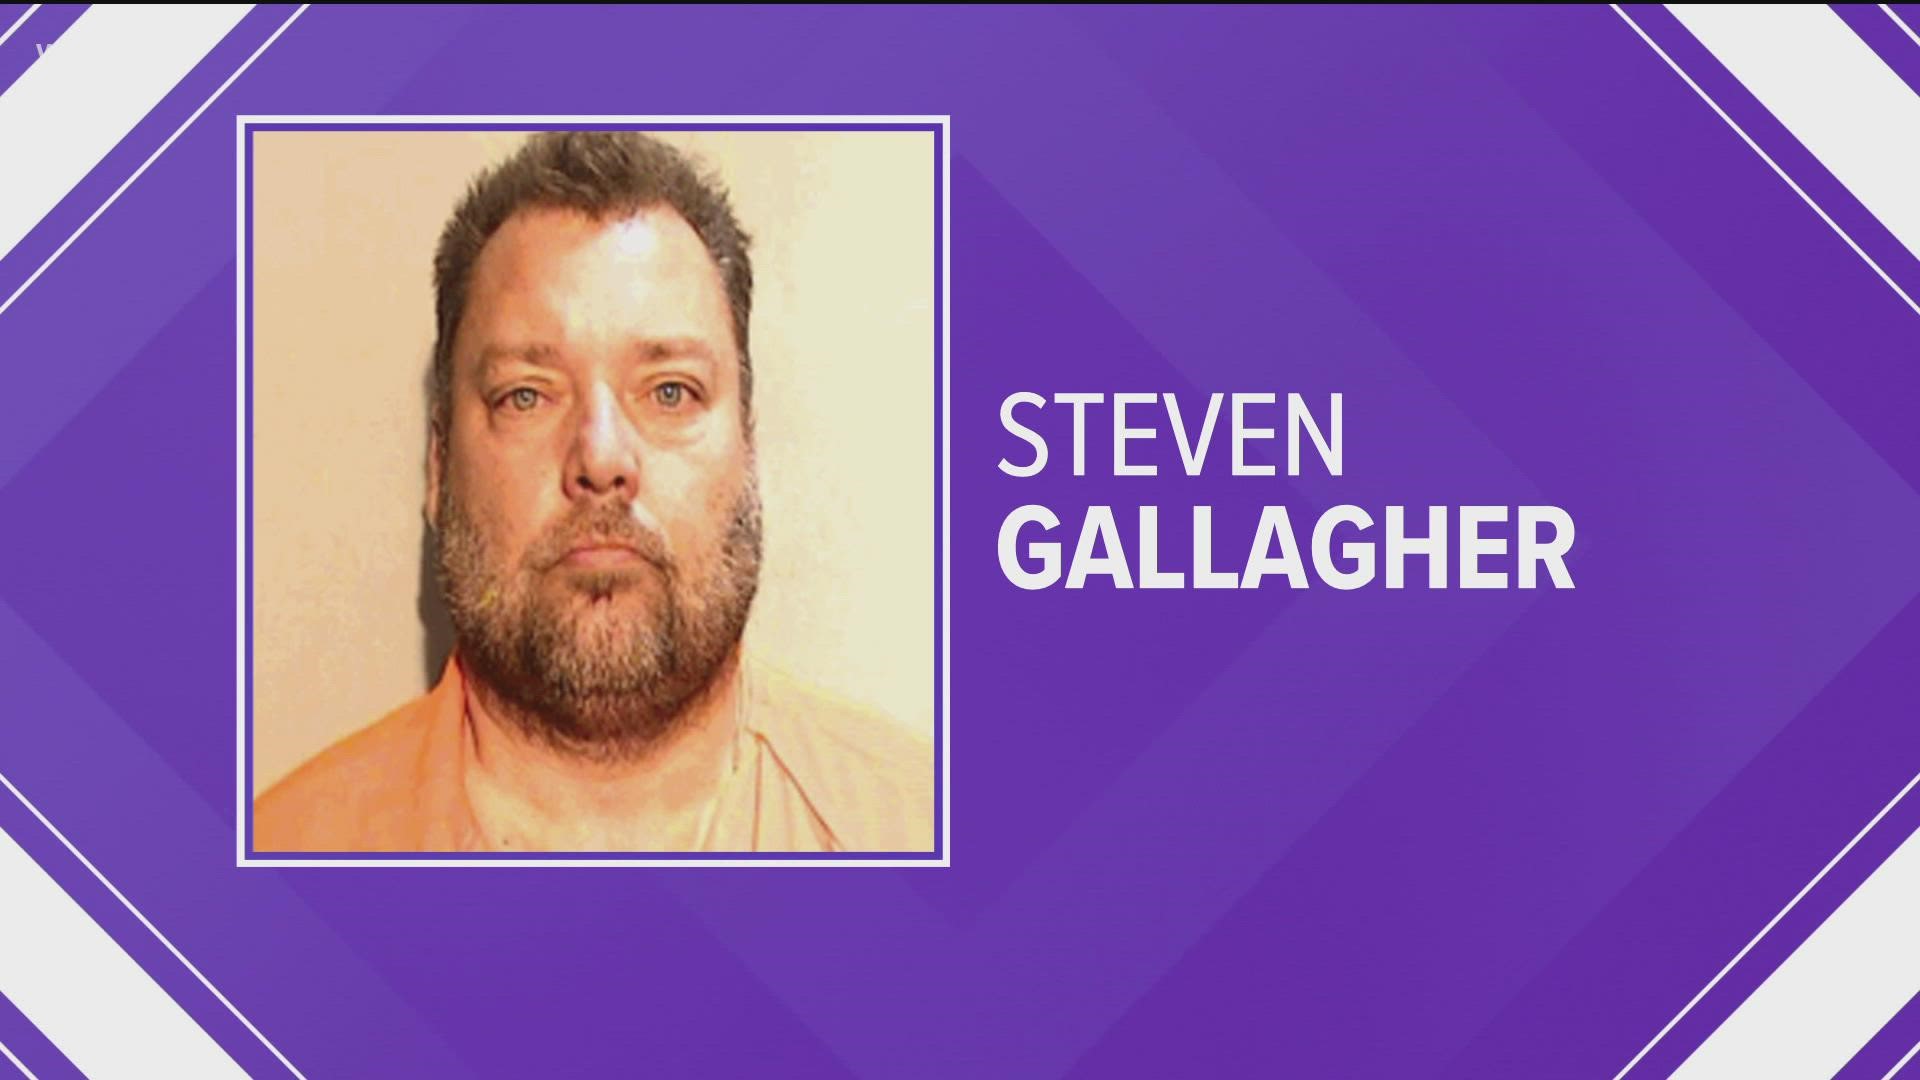 Steven Gallagher, of Maumee, was charged Tuesday in New York federal court alleging he lied to over 70,000 Twitter followers to earn over $1 million illegally.